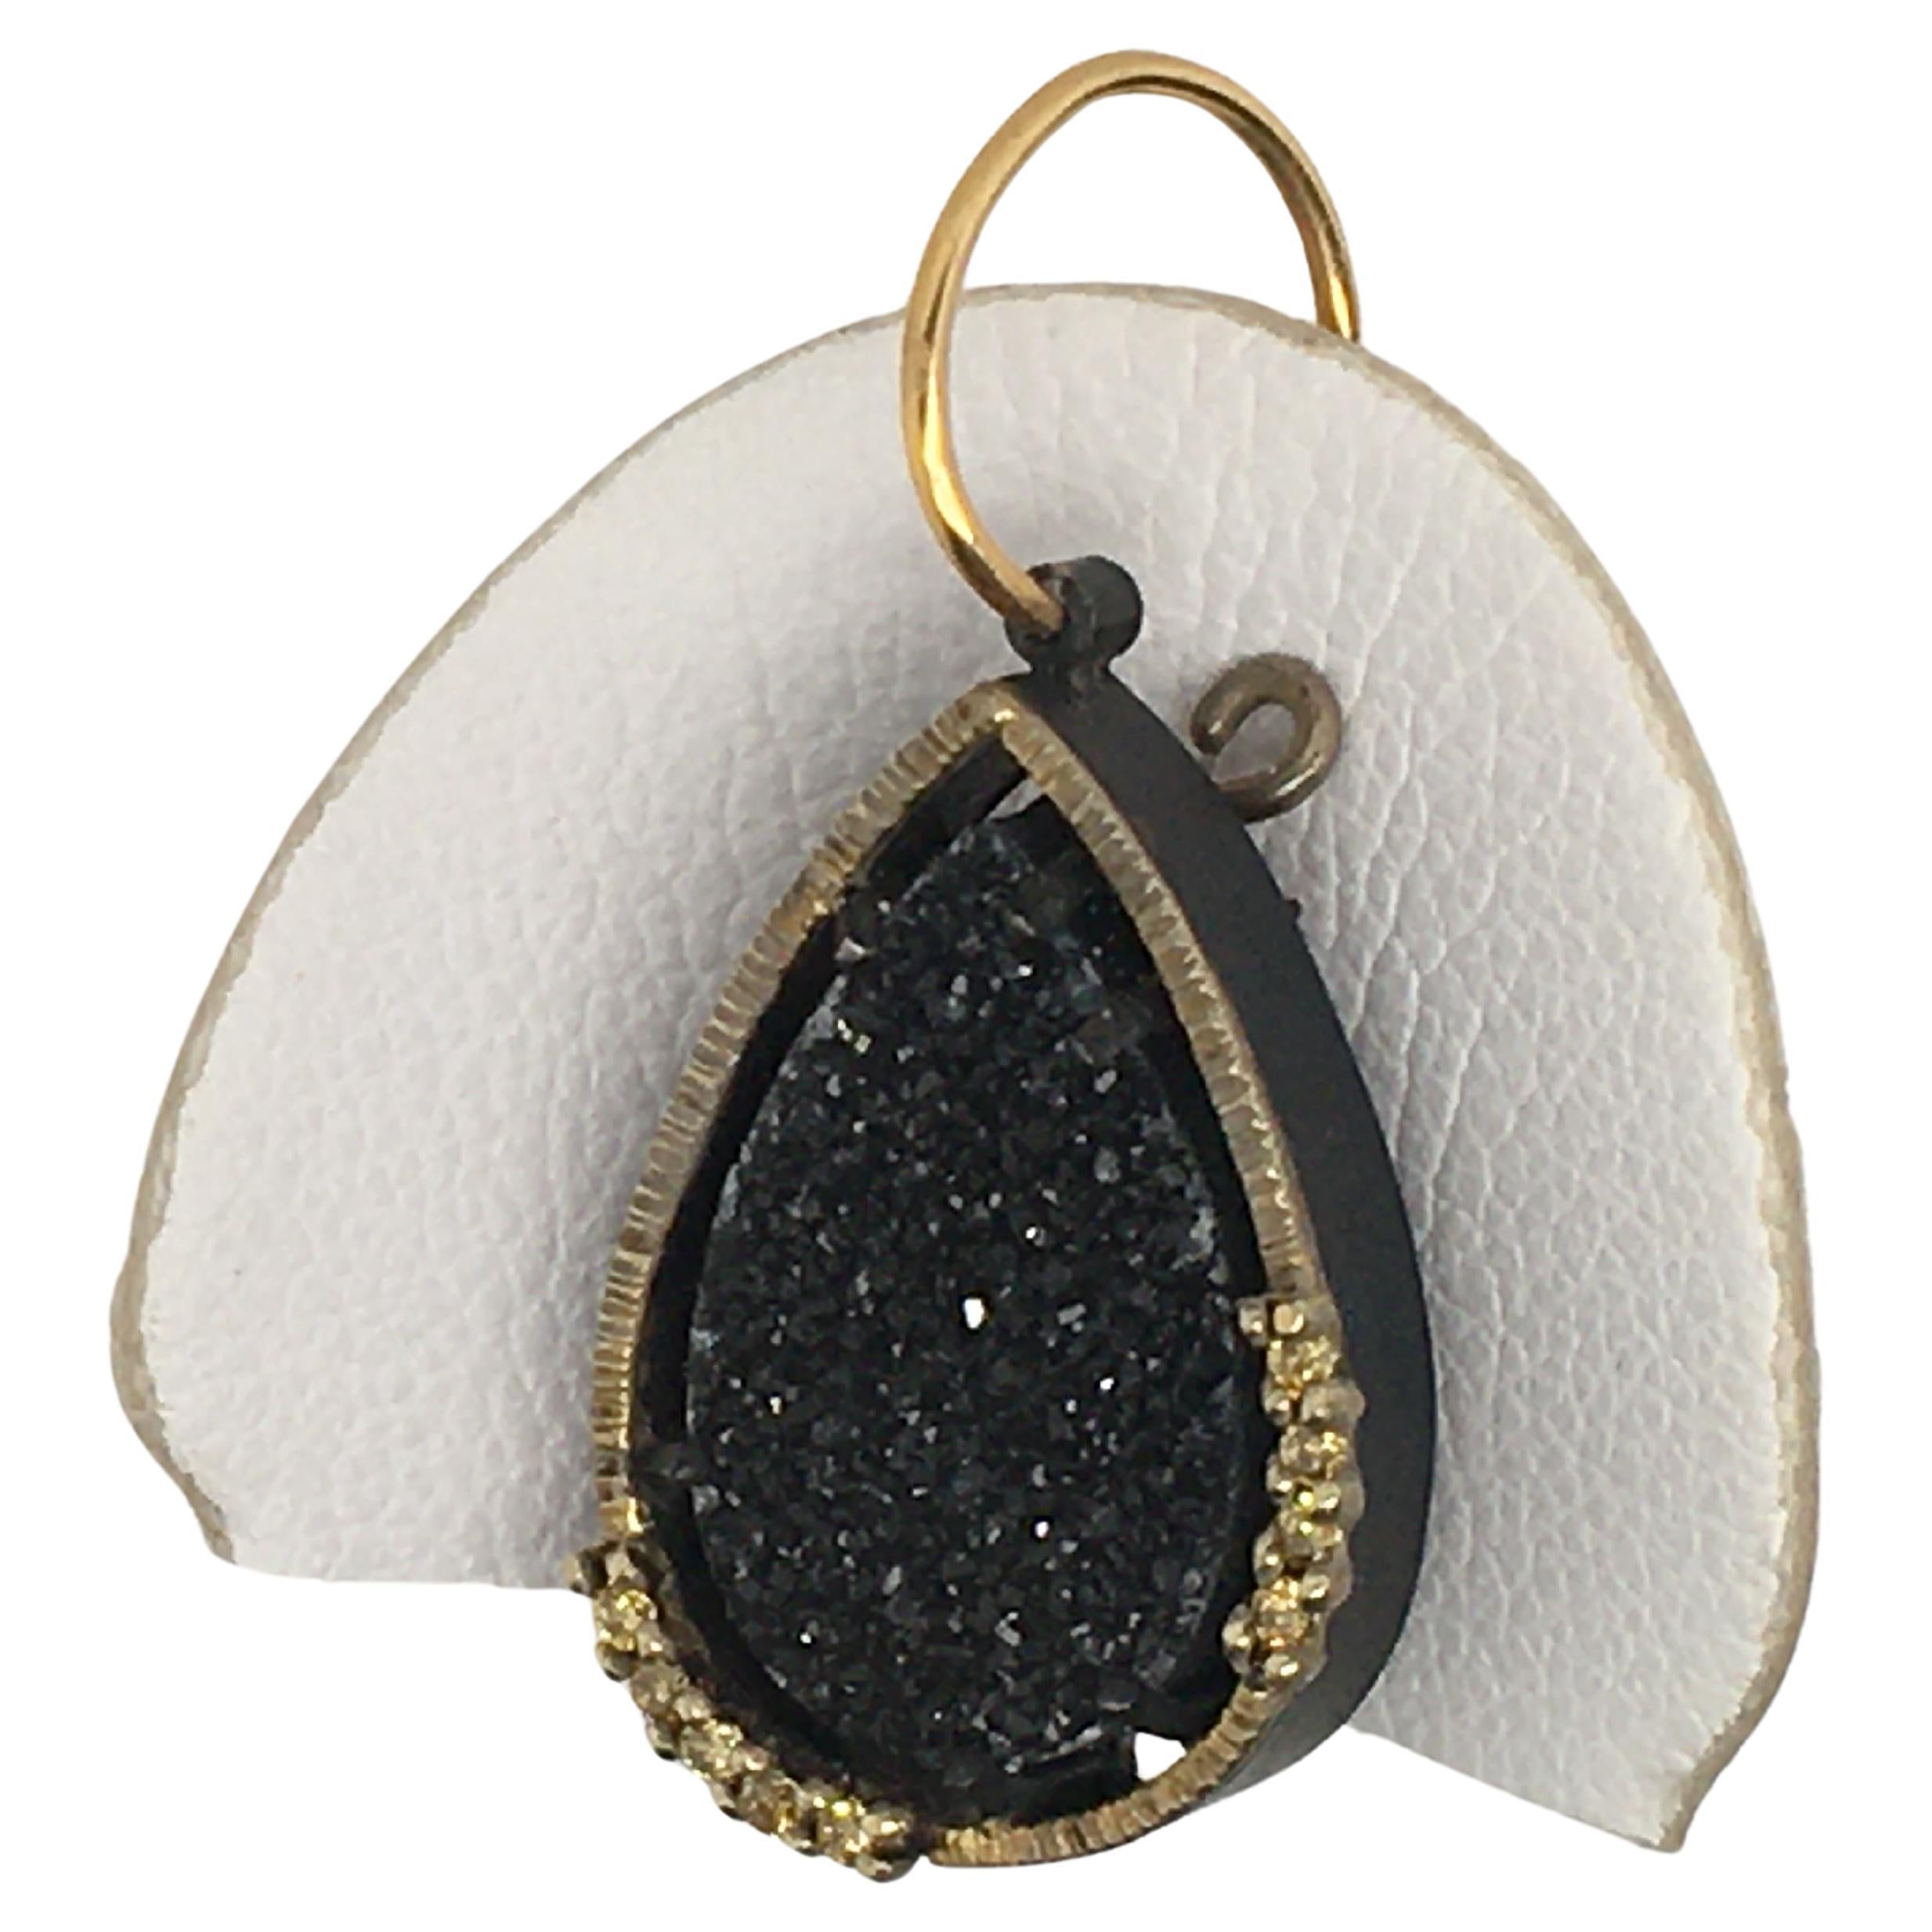 From Elizabeth Garvin's Spiral Collection, these #4 natural prong-set black druzy teardrop earrings in 18k gold are backed with oxidized sterling silver and feature surrounding natural yellow diamonds.  As with every one of Ms Garvin's pieces, they